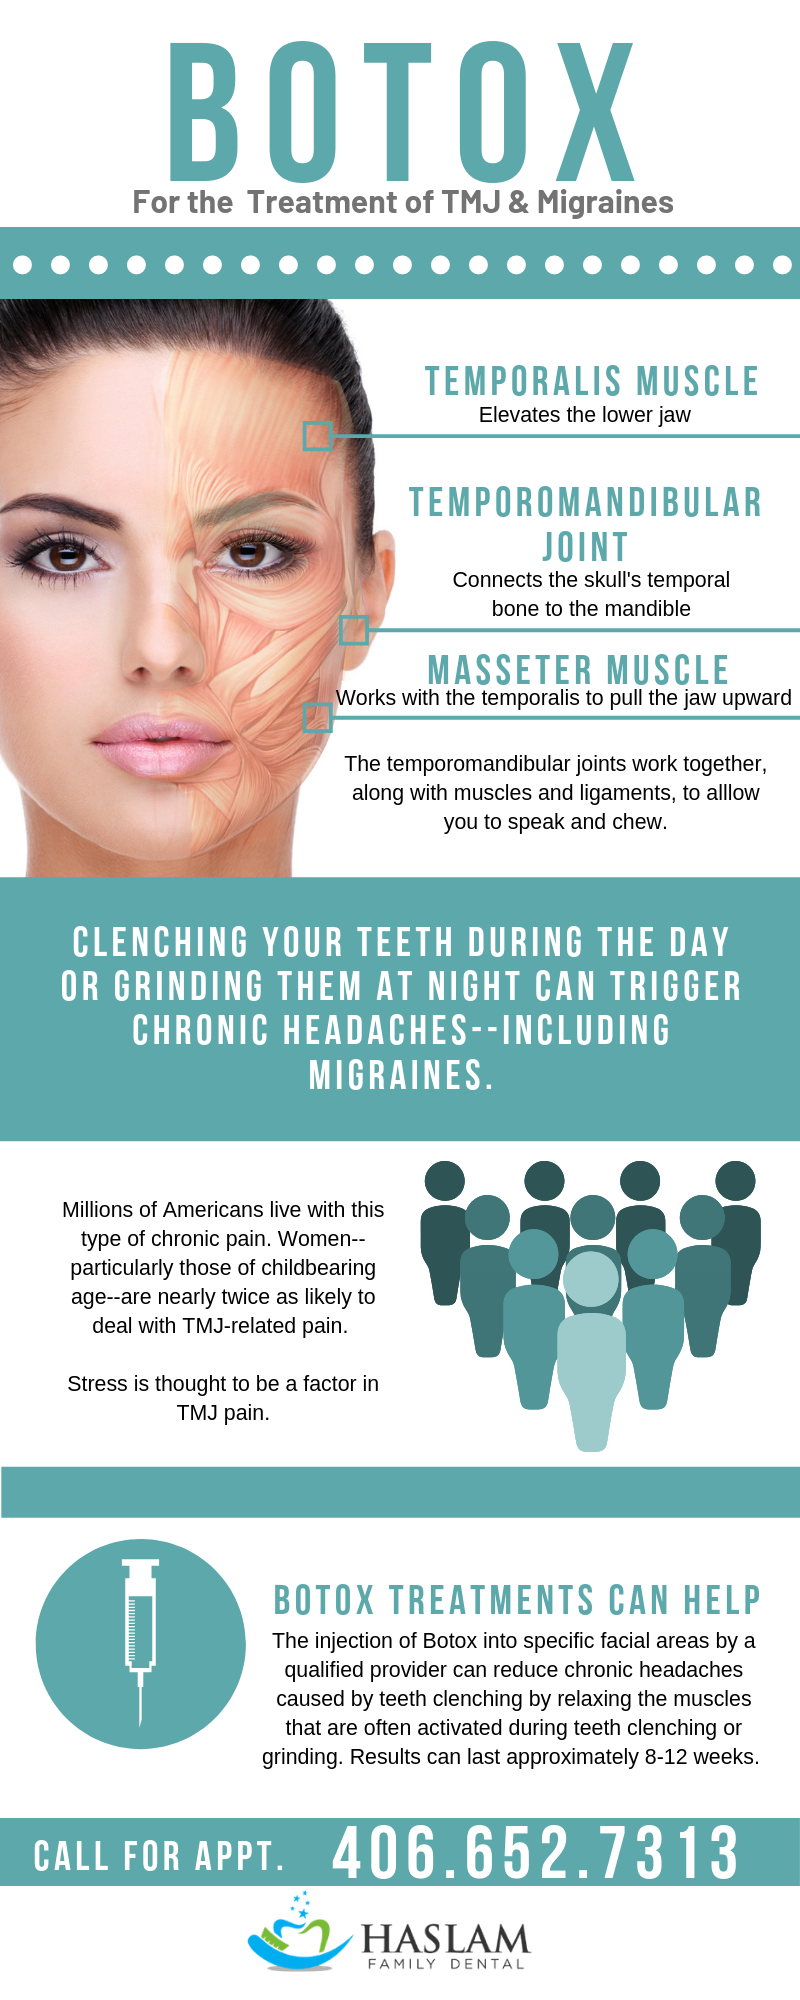 Botox for the Treatment of TMJ and Migraines, Billings, Montana Family Dentist Dr. Cody Haslam